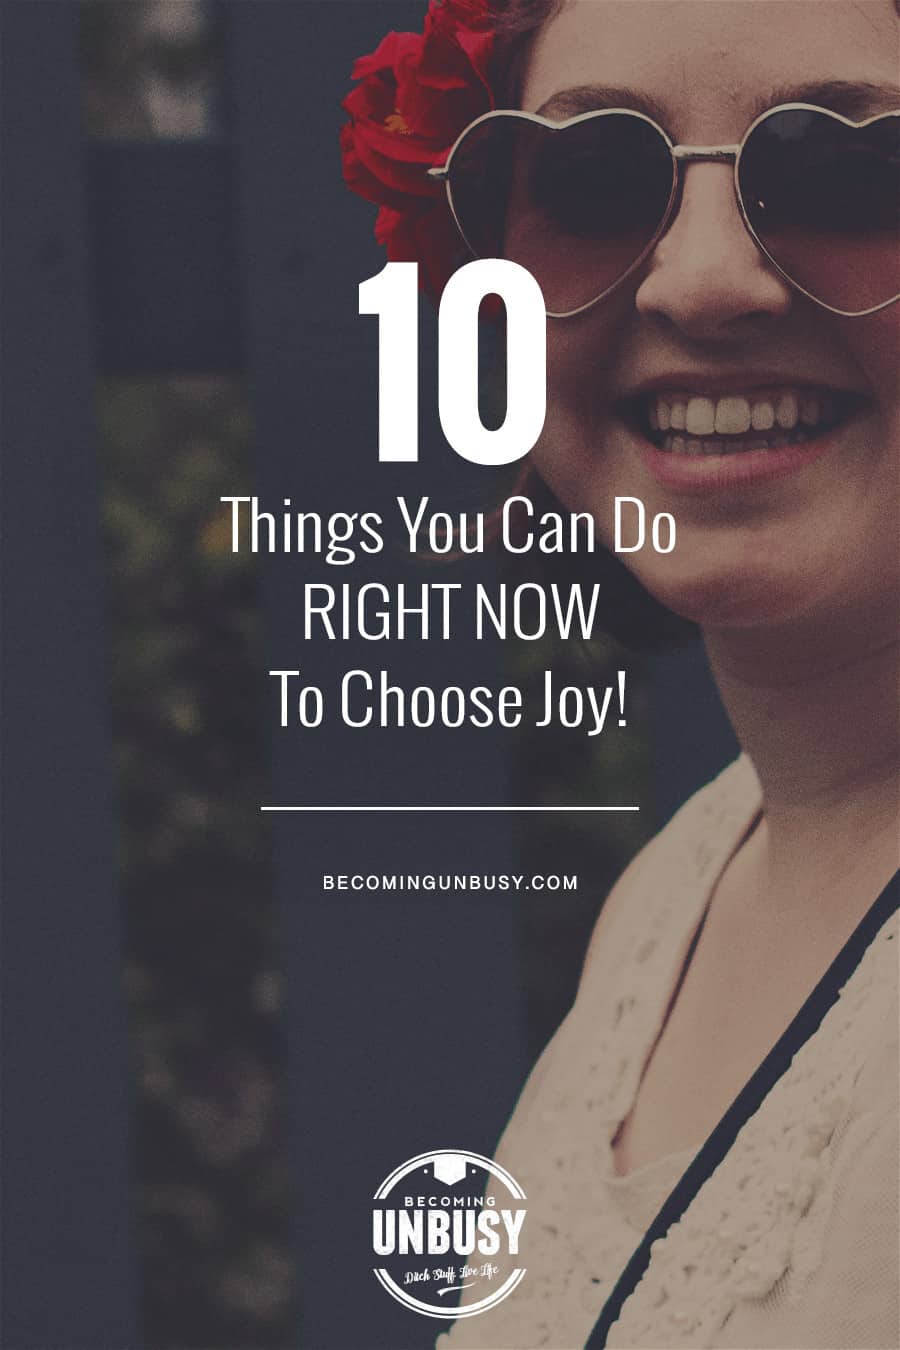 10 Things You Can Do RIGHT NOW To Choose Joy #choosejoy #selfcare *Loving this post and collection of inspirational quotes